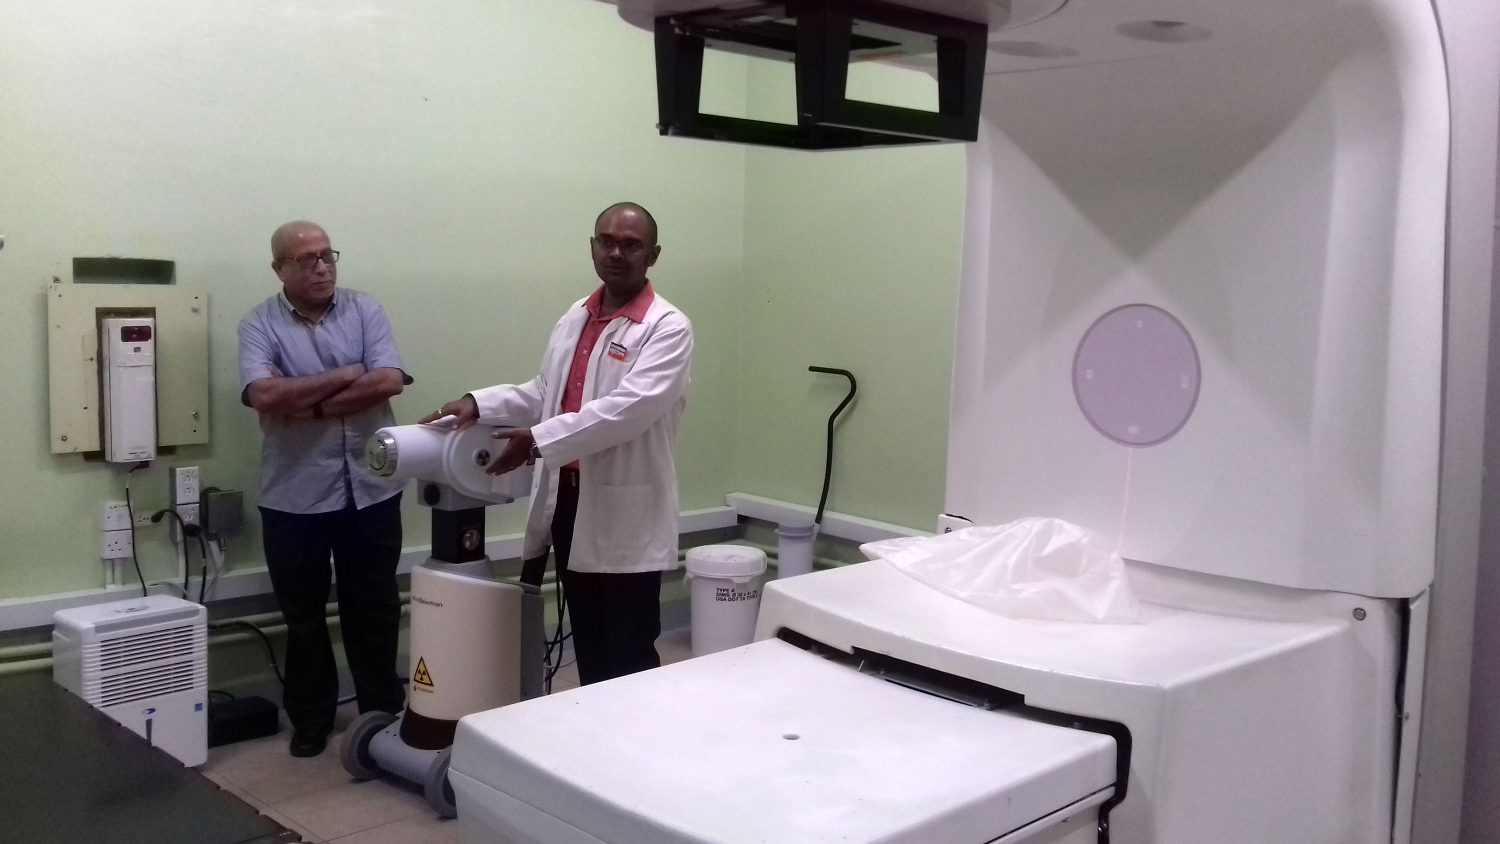  Dr. Sayan Chakraborty explains how the brachytherapy machine works, while Dr. Syed Ghazi looks on.